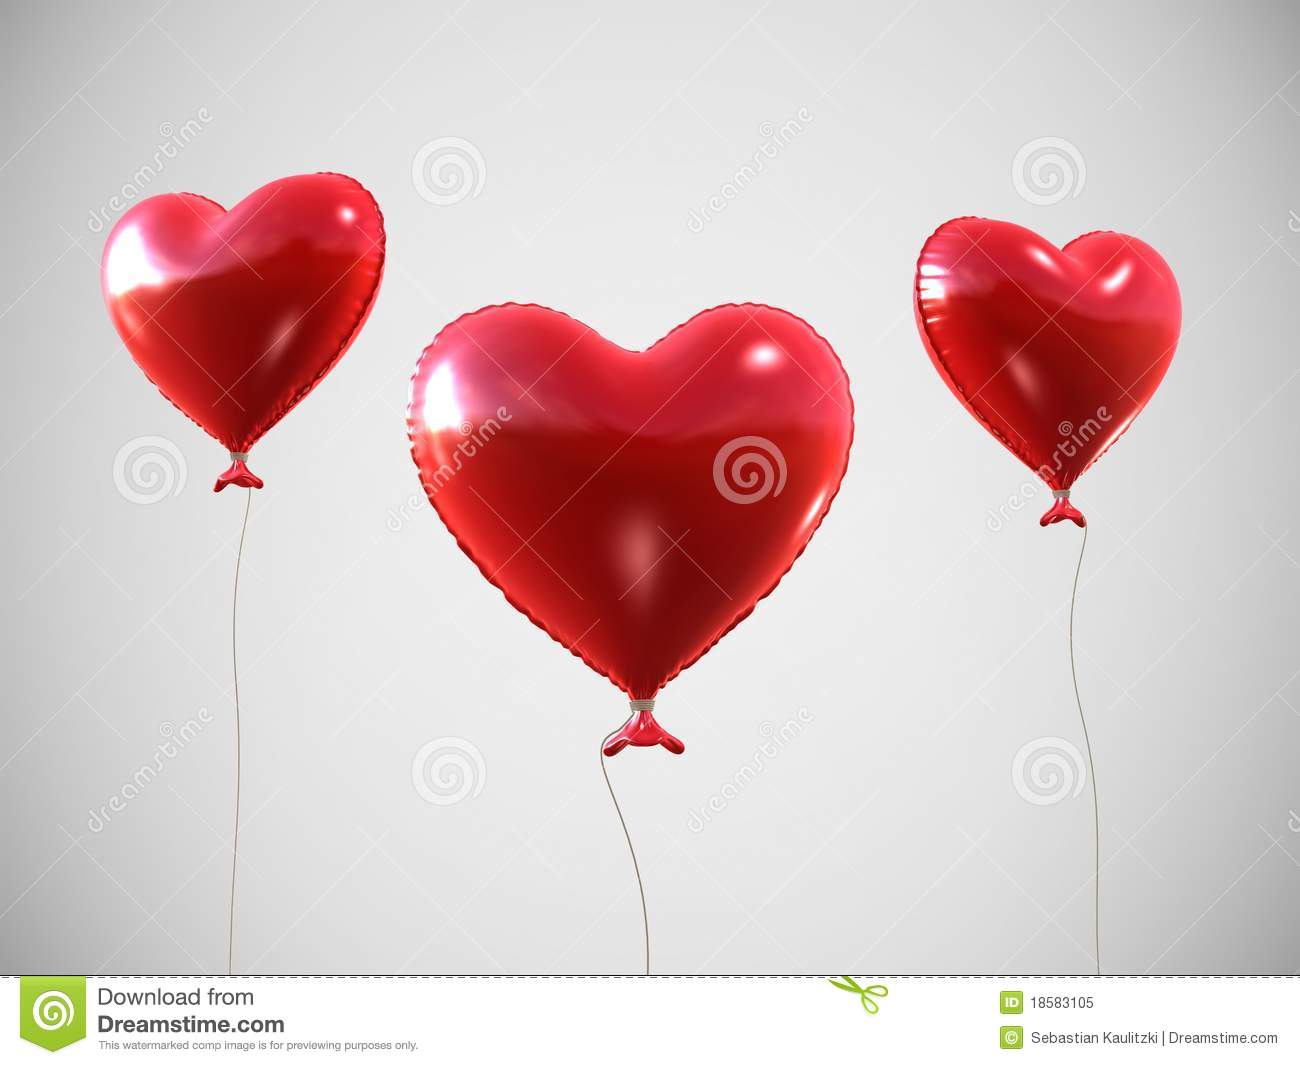 3d Rendered Illustration Of Some Isolated Red Heart Shaped Balloons